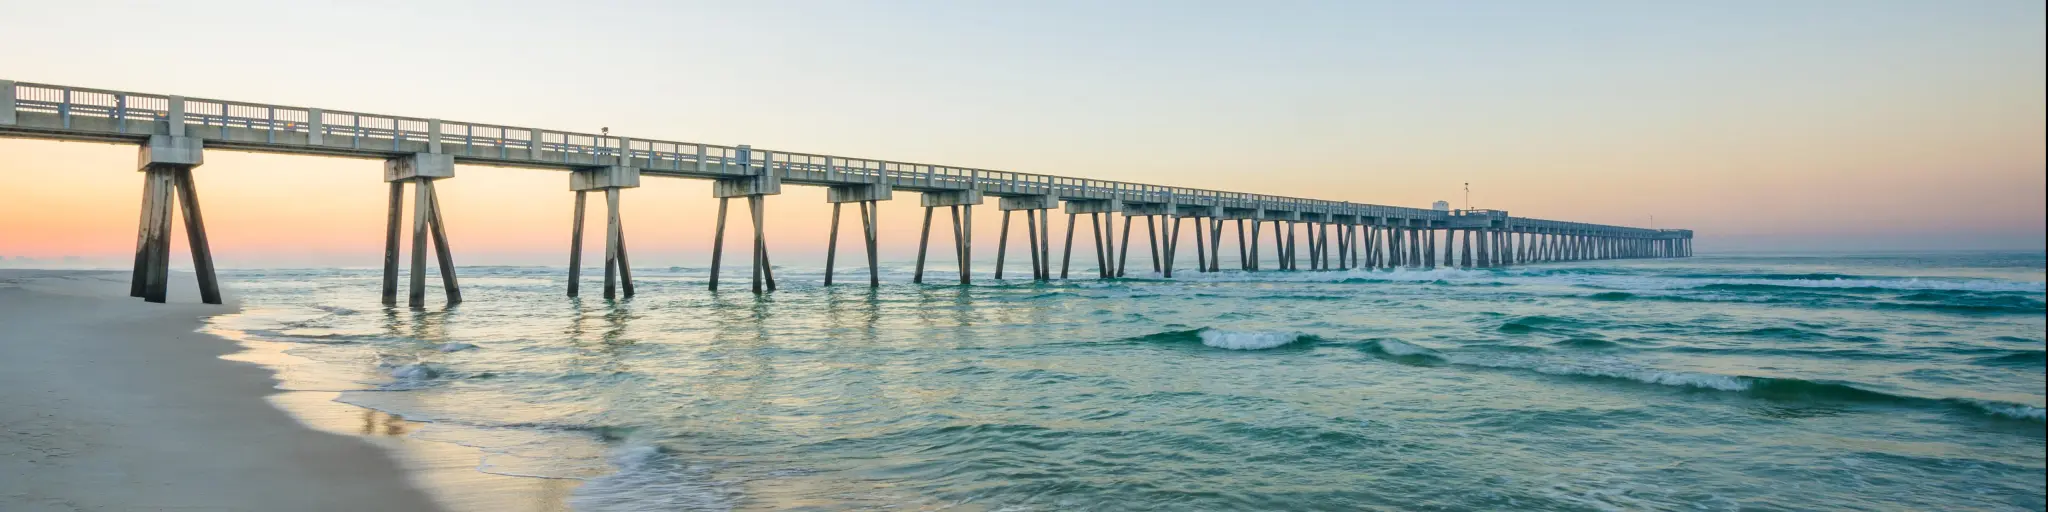 M.B. Miller County Pier and Gulf of Mexico at sunrise, in Panama City Beach, Florida, with white sands below